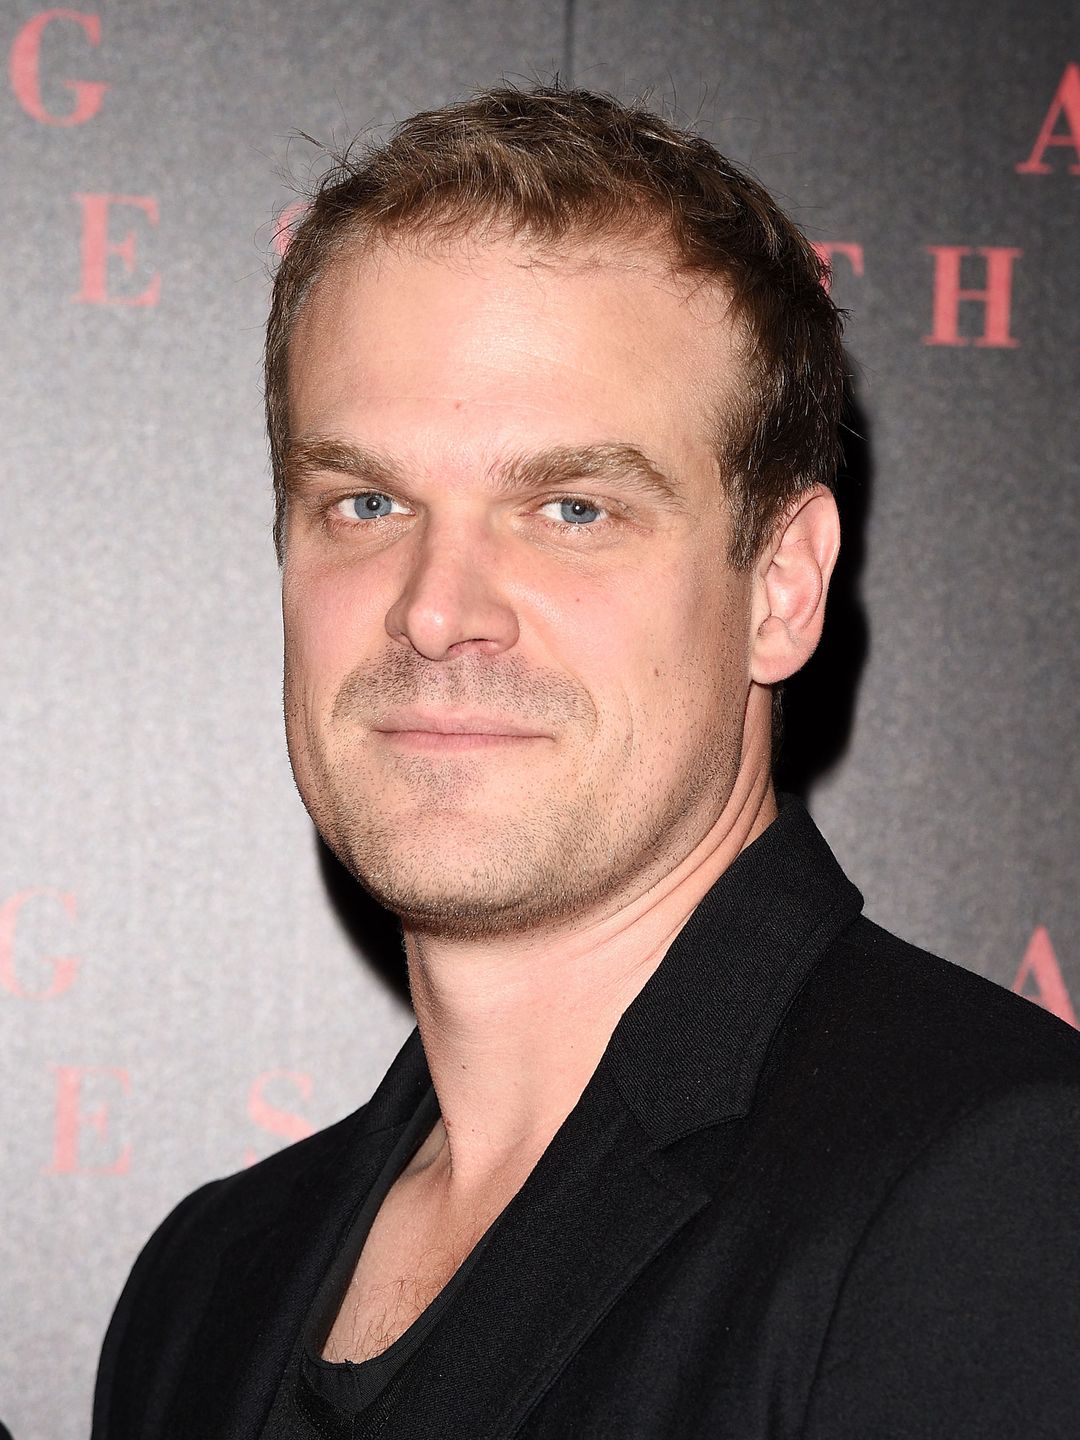 David Harbour in his youth